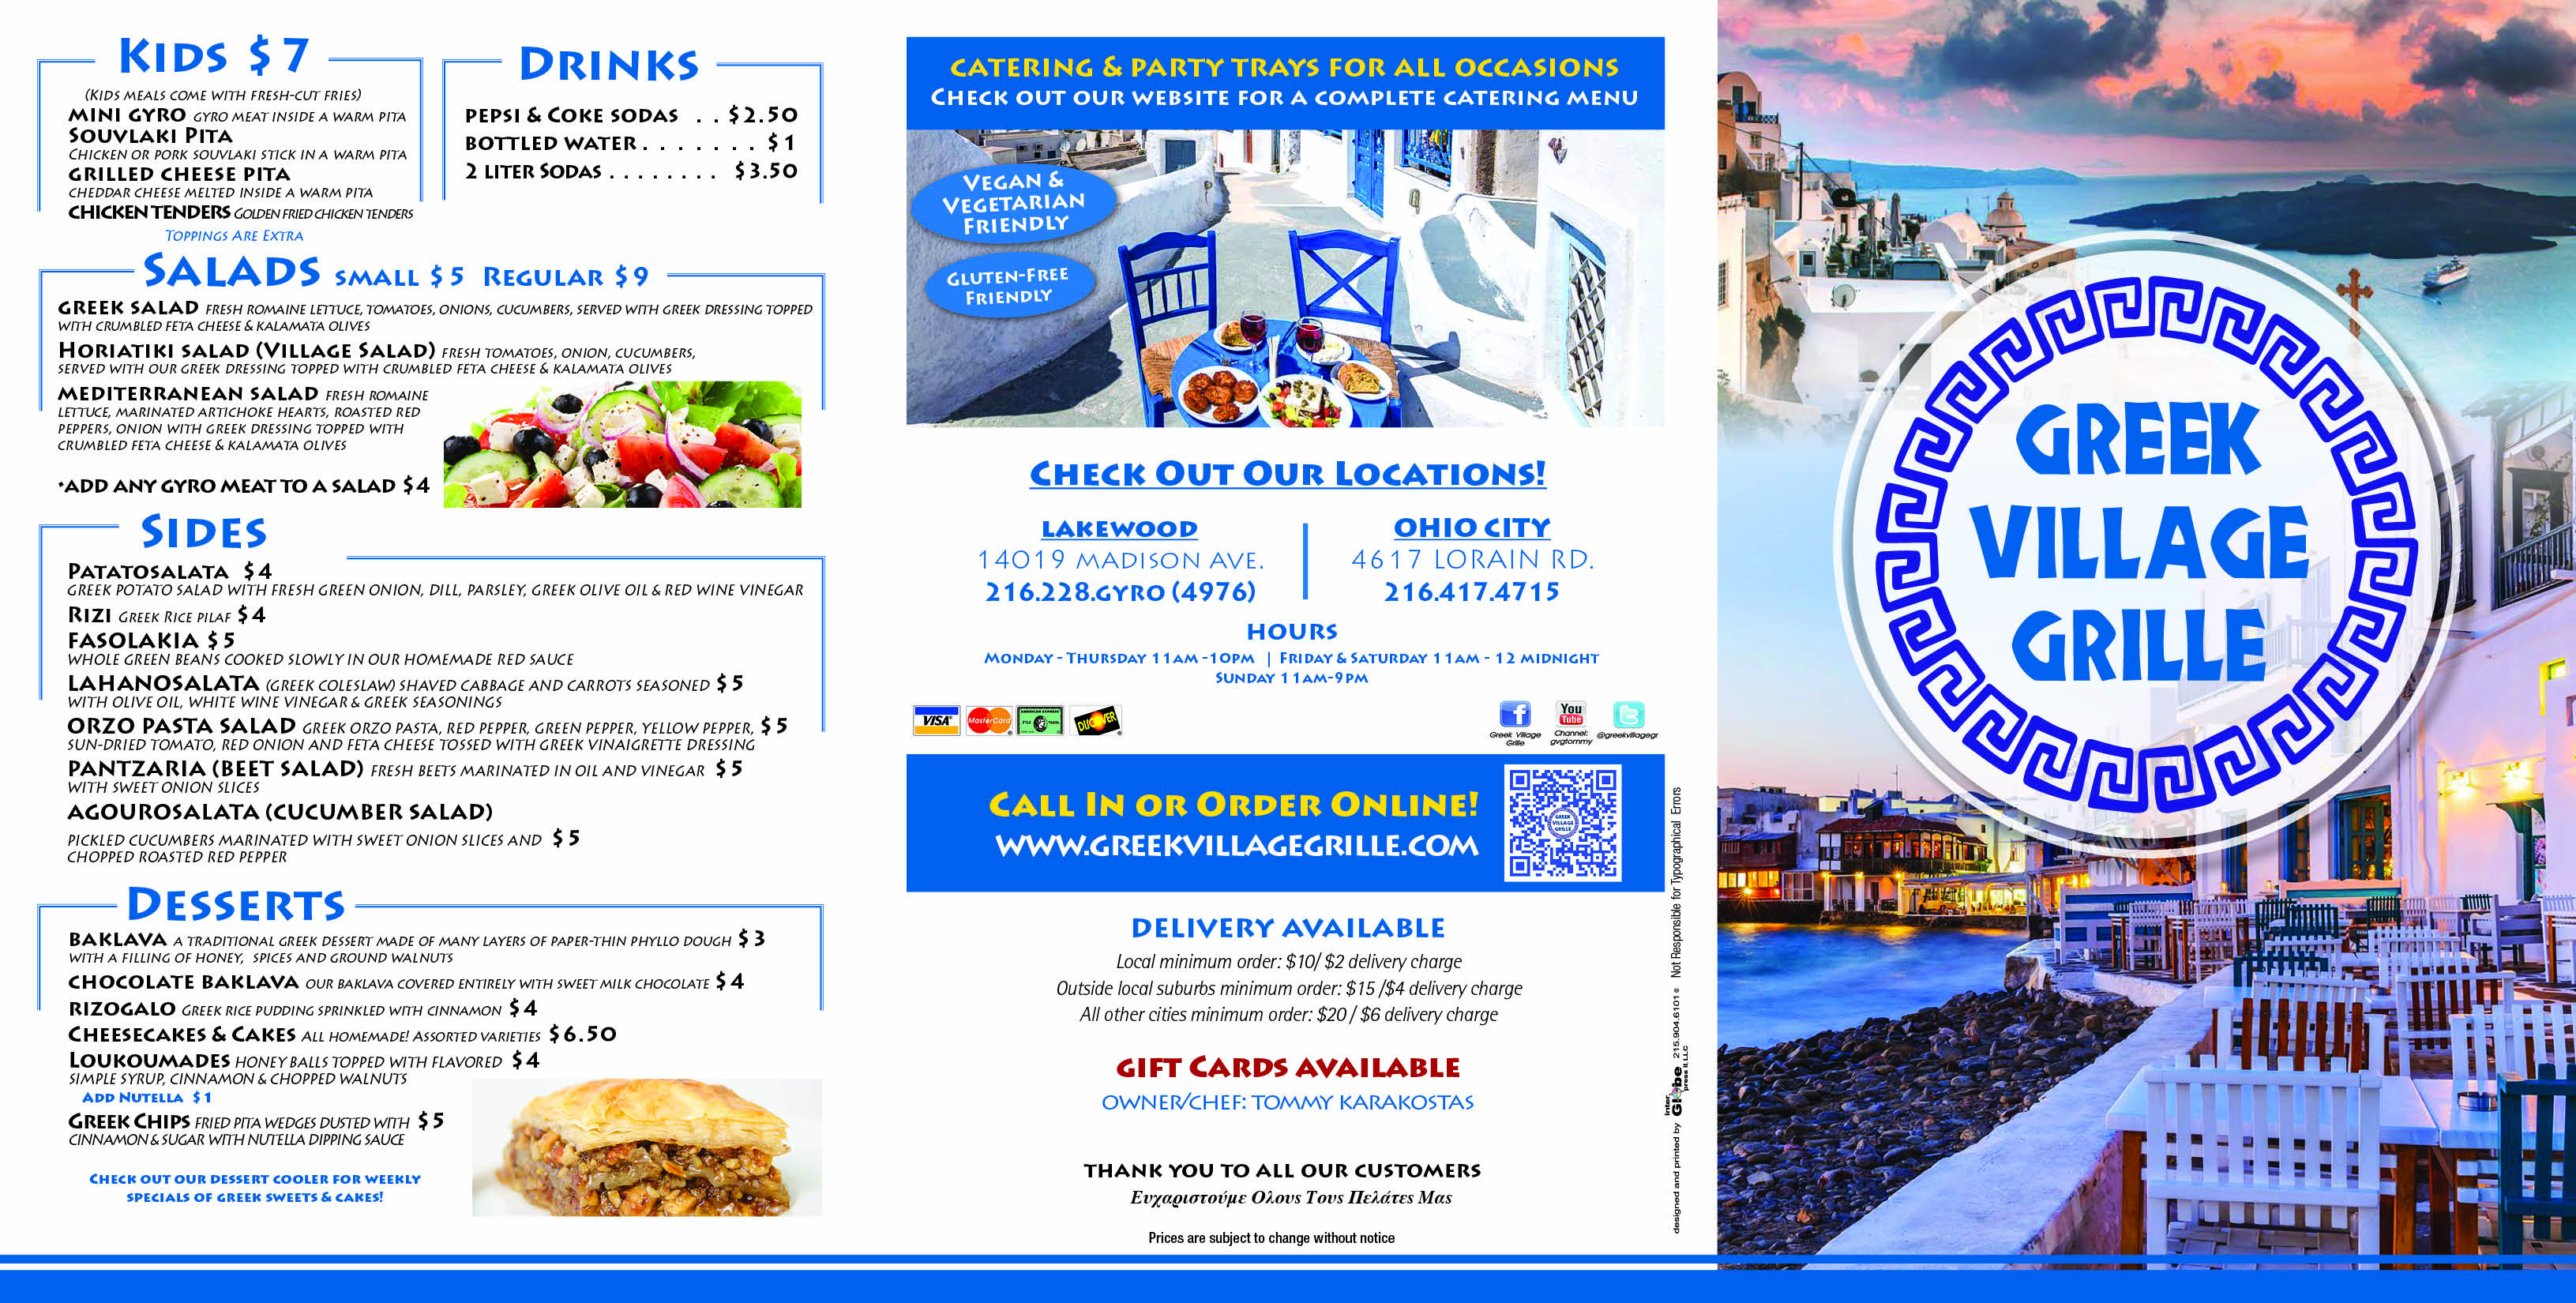 Menu of The Greek Village Grille in Lakewood & Broadview Heights Ohio serving the best Greek food including Gyros, Salads and much more.